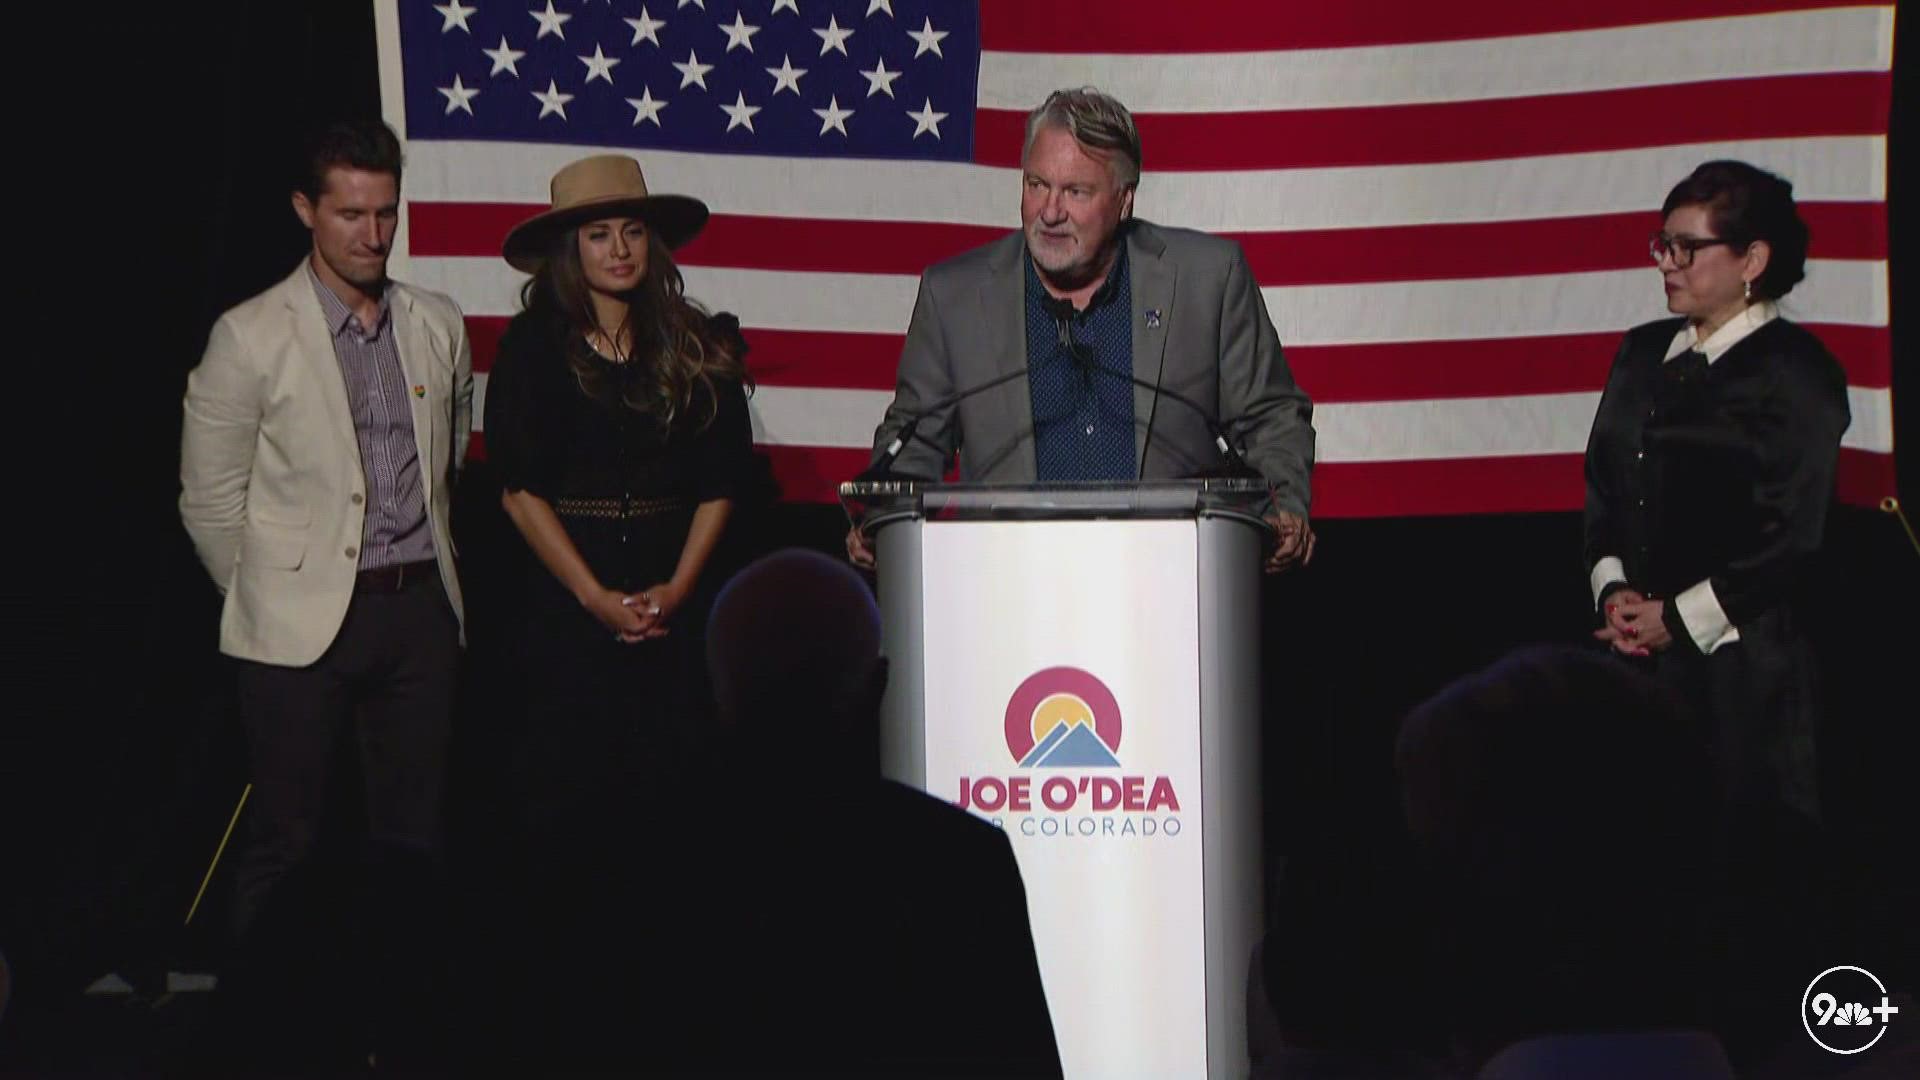 "We could not have done this without the massive coalition we have built here in Colorado," O'Dea said in his victory speech.